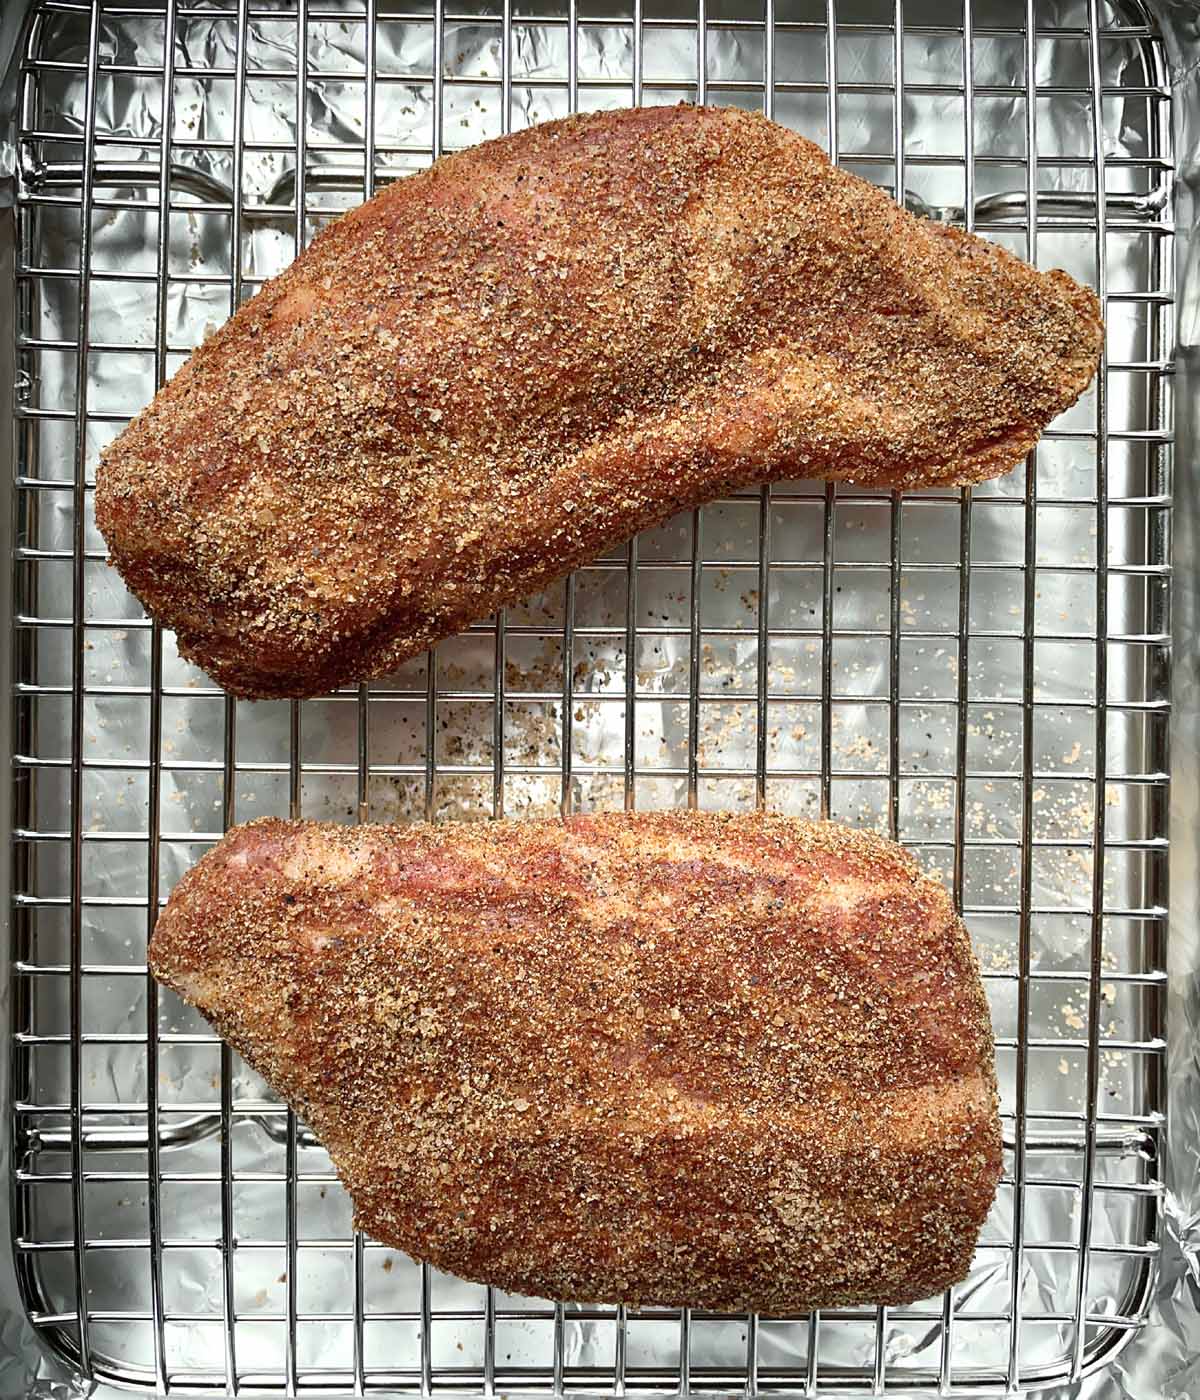 Two spice-coated pieces of meat on a metal rack in a baking pan.